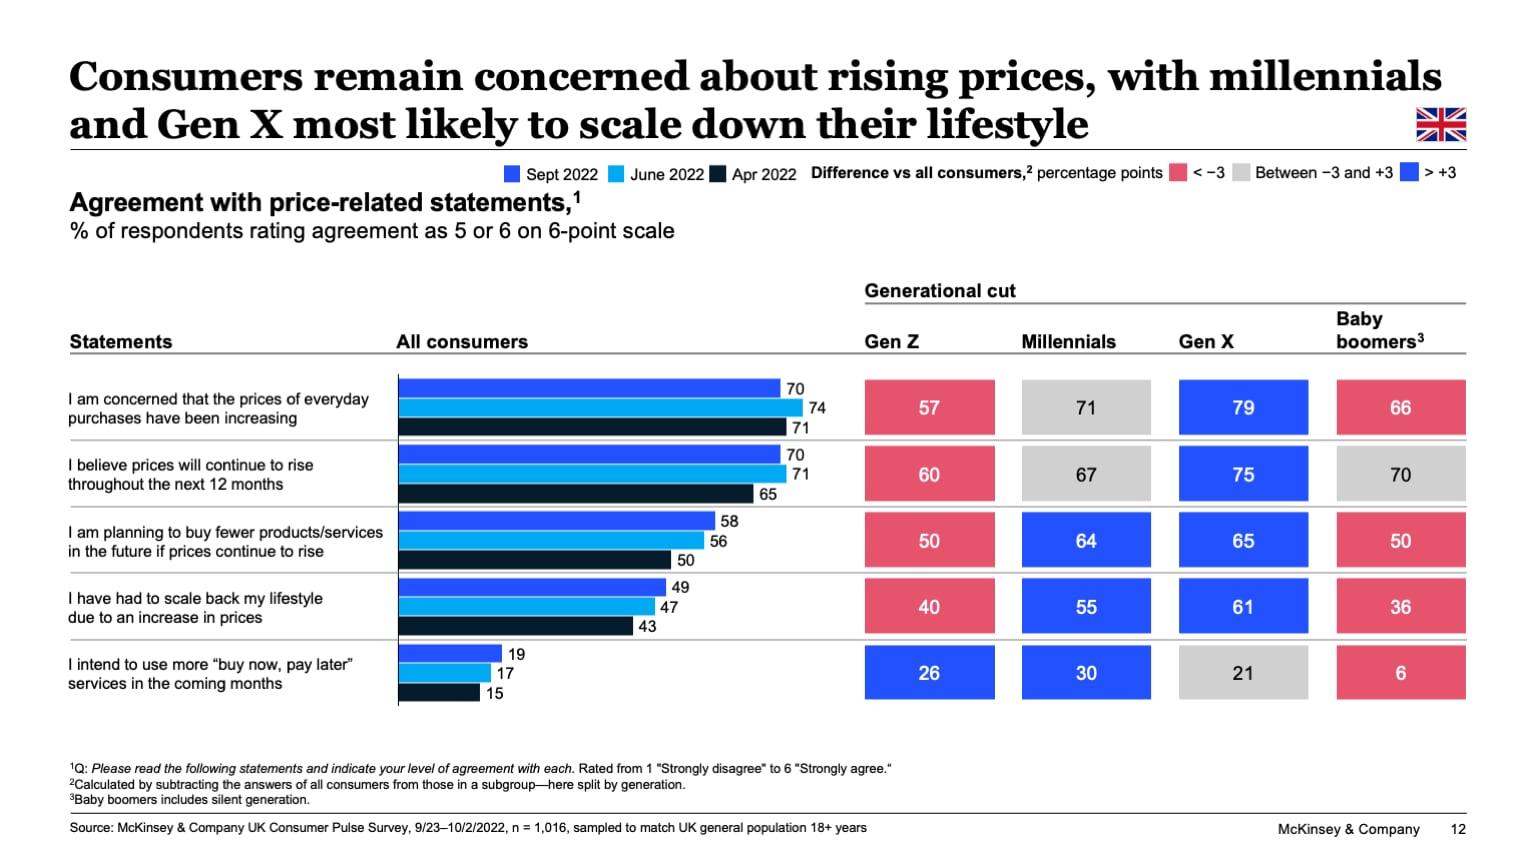 Consumers remain concerned about rising prices, with millennials and Gen X most likely to scale down their lifestyle